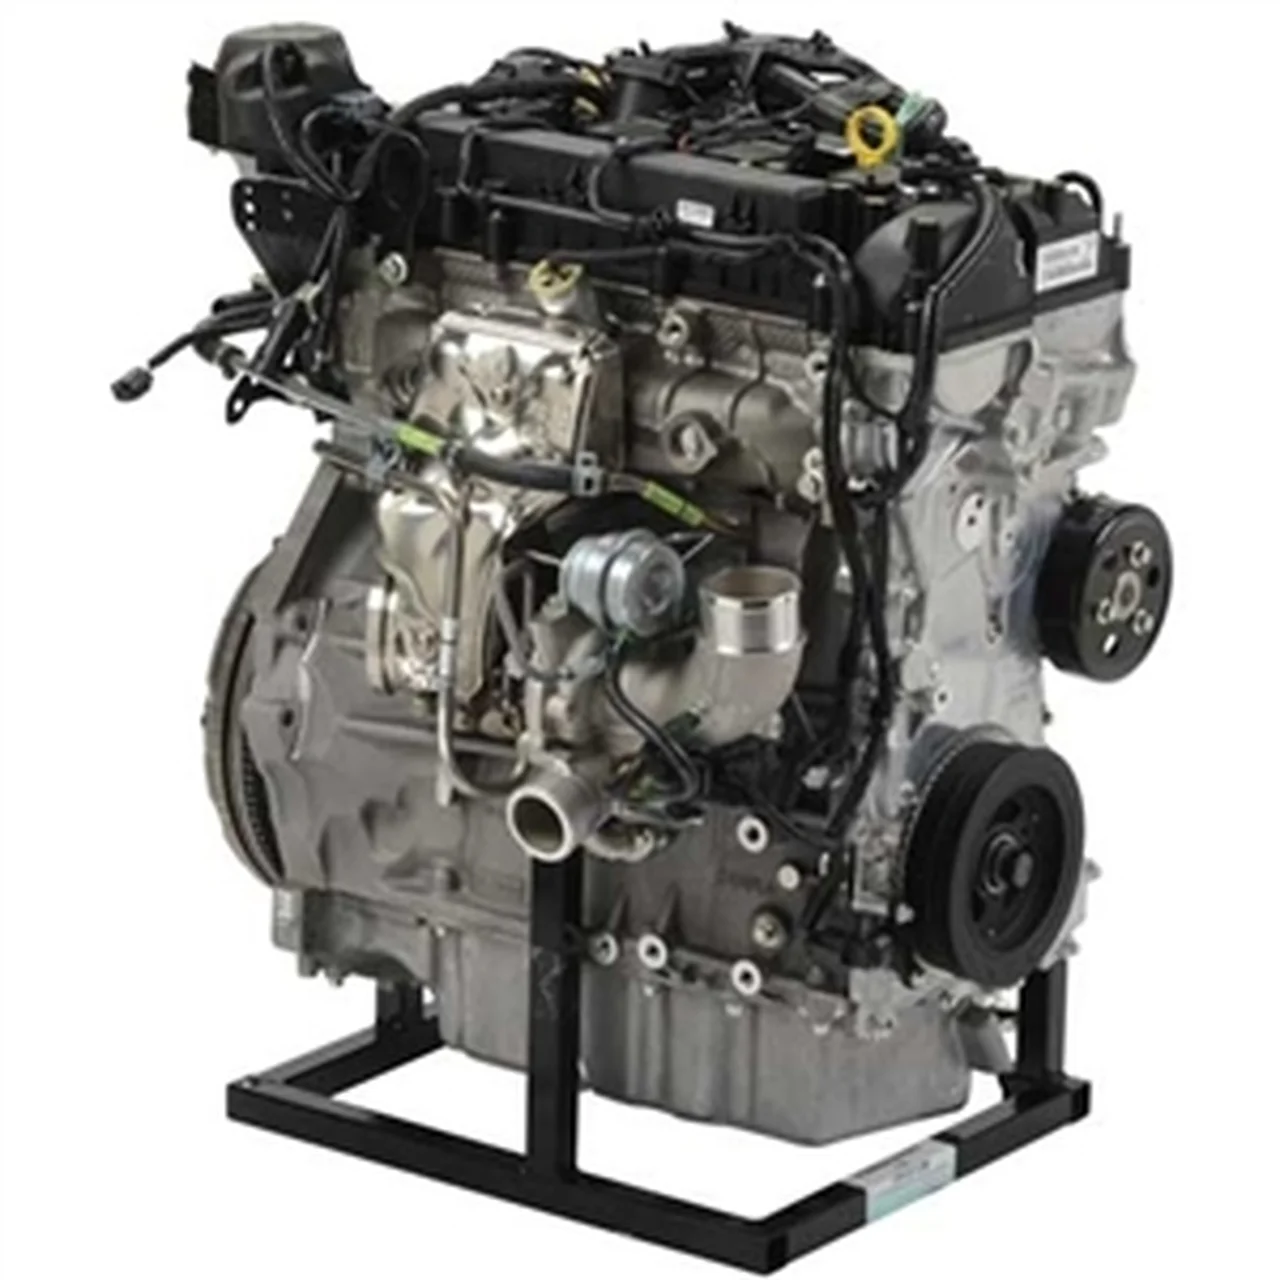 Ford Racing 2.3L 310HP Mustang Ecoboost Engine Kit - Upgrade Your